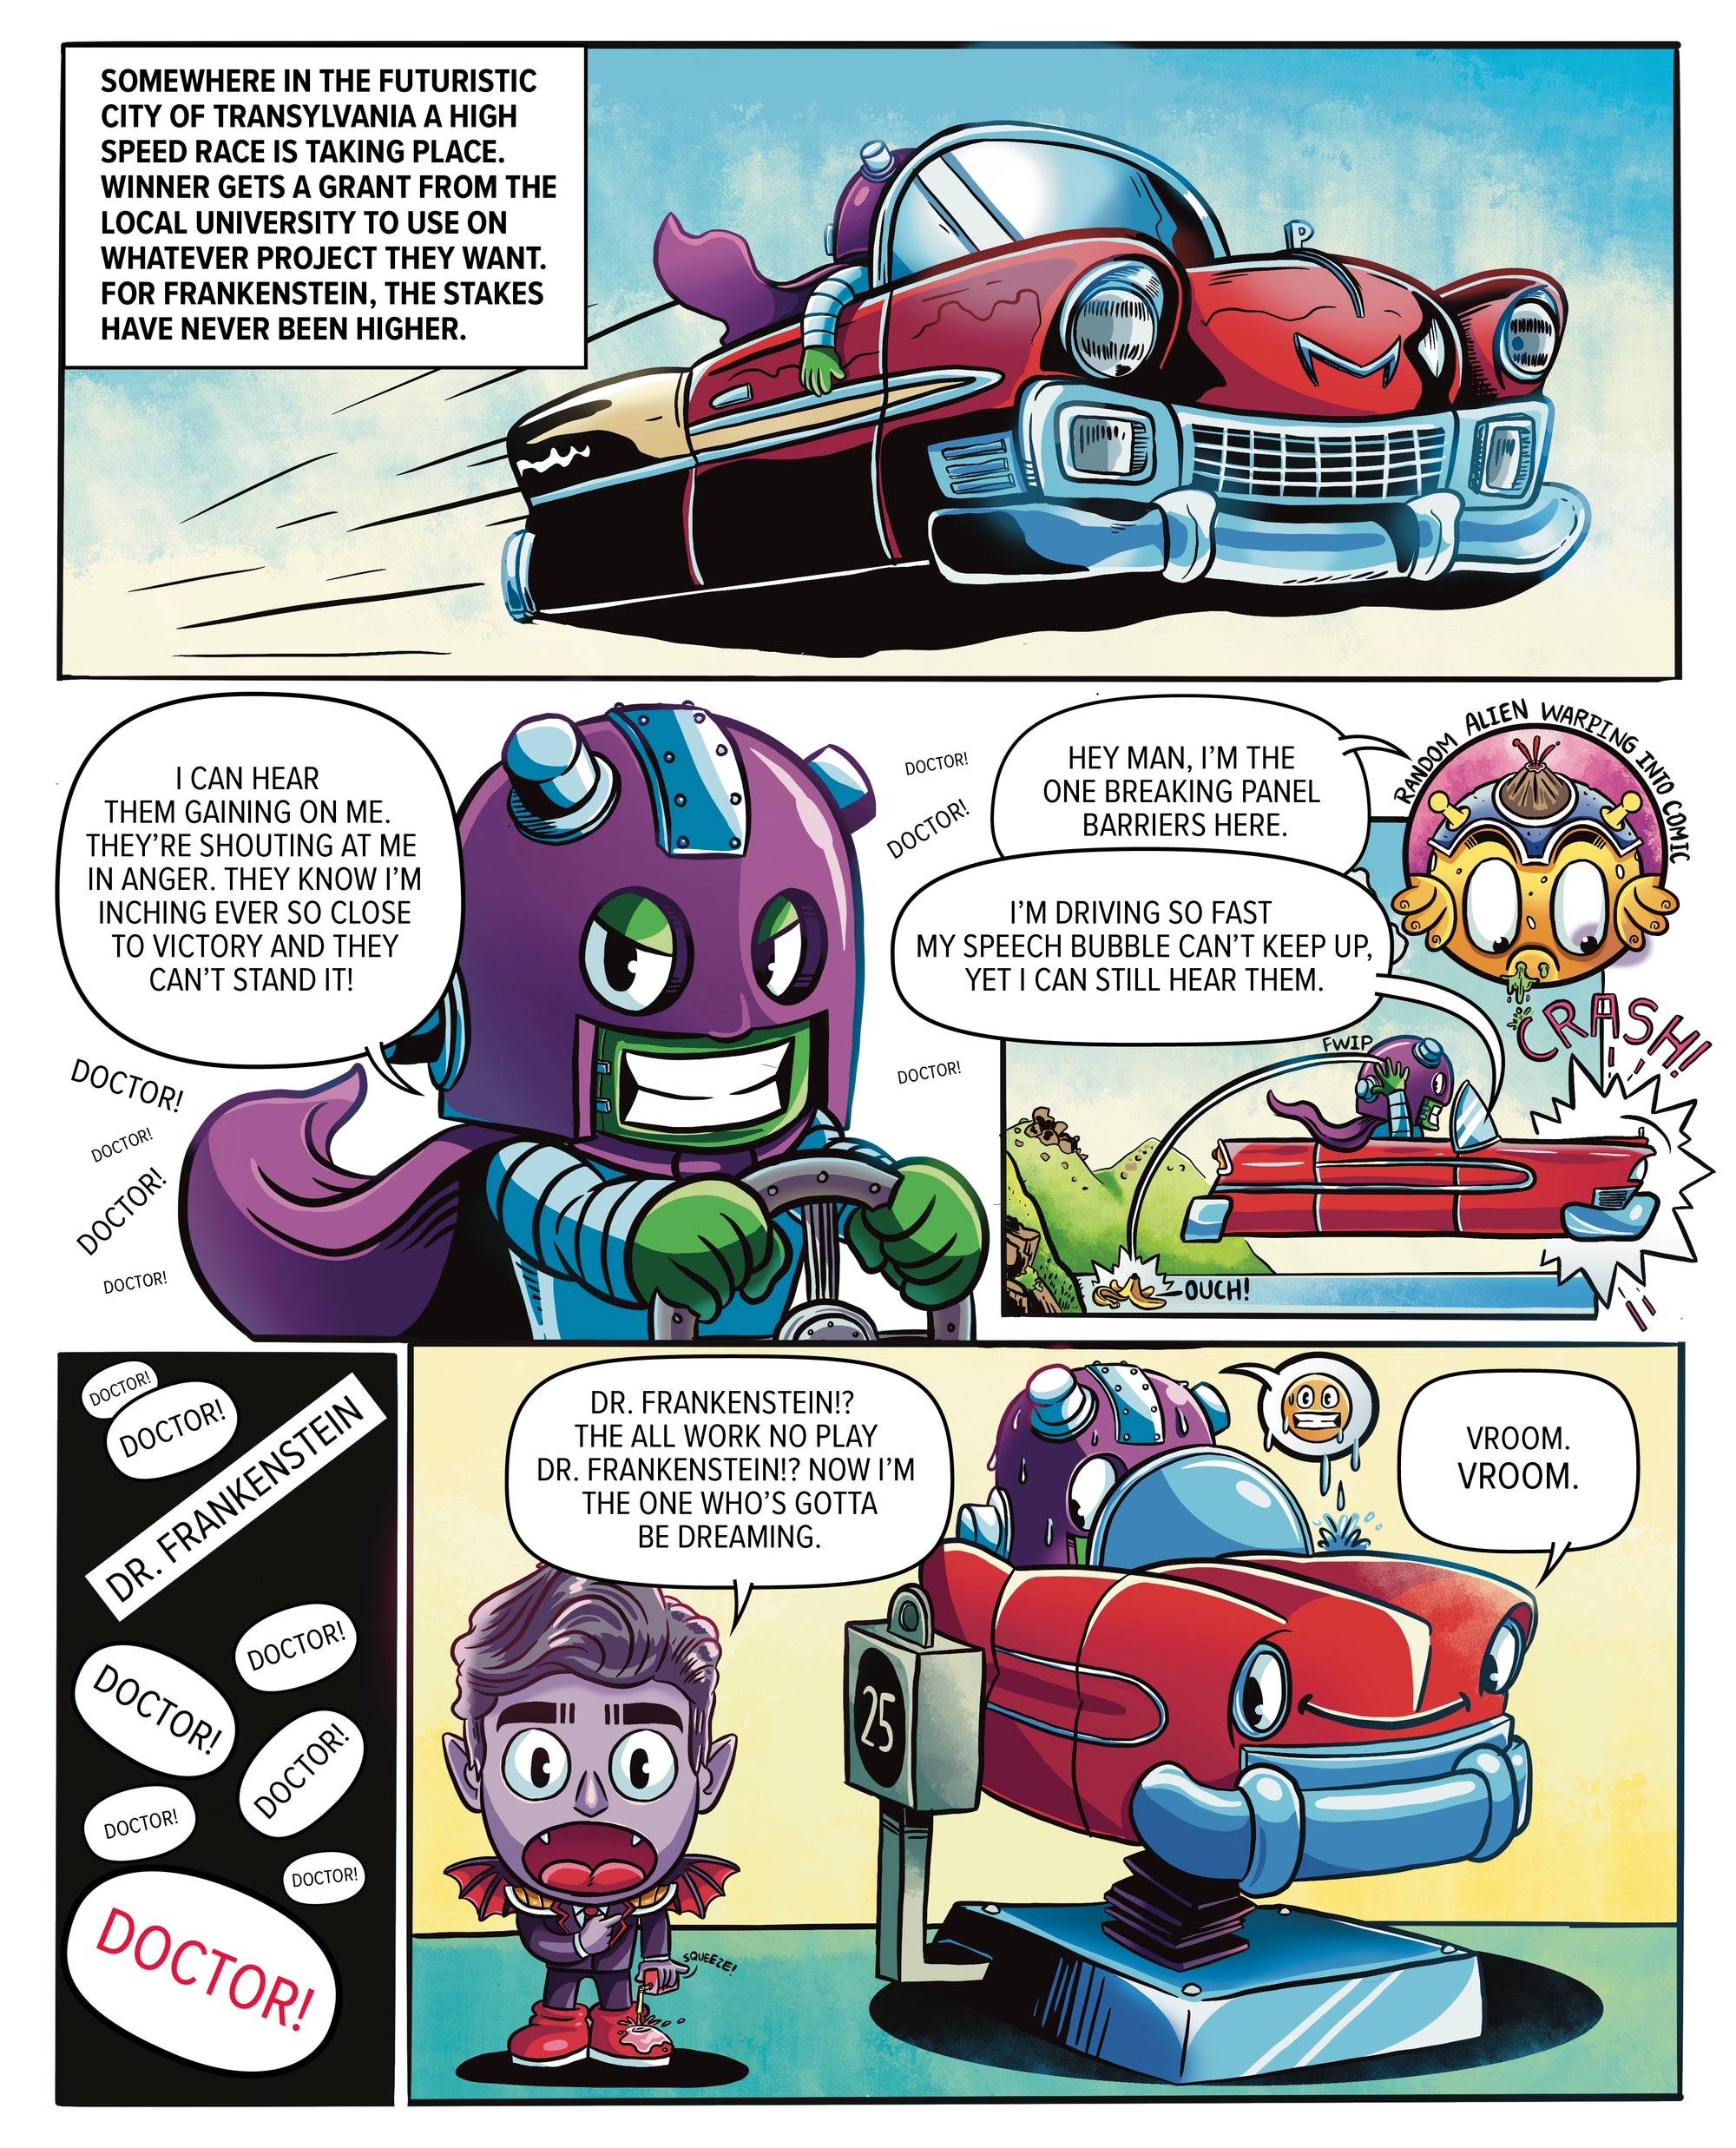 Comic strip showing Professor Frankenstein racing around in a flying, shiny red car. Its a high speed race and there are high stakes for the Professor.